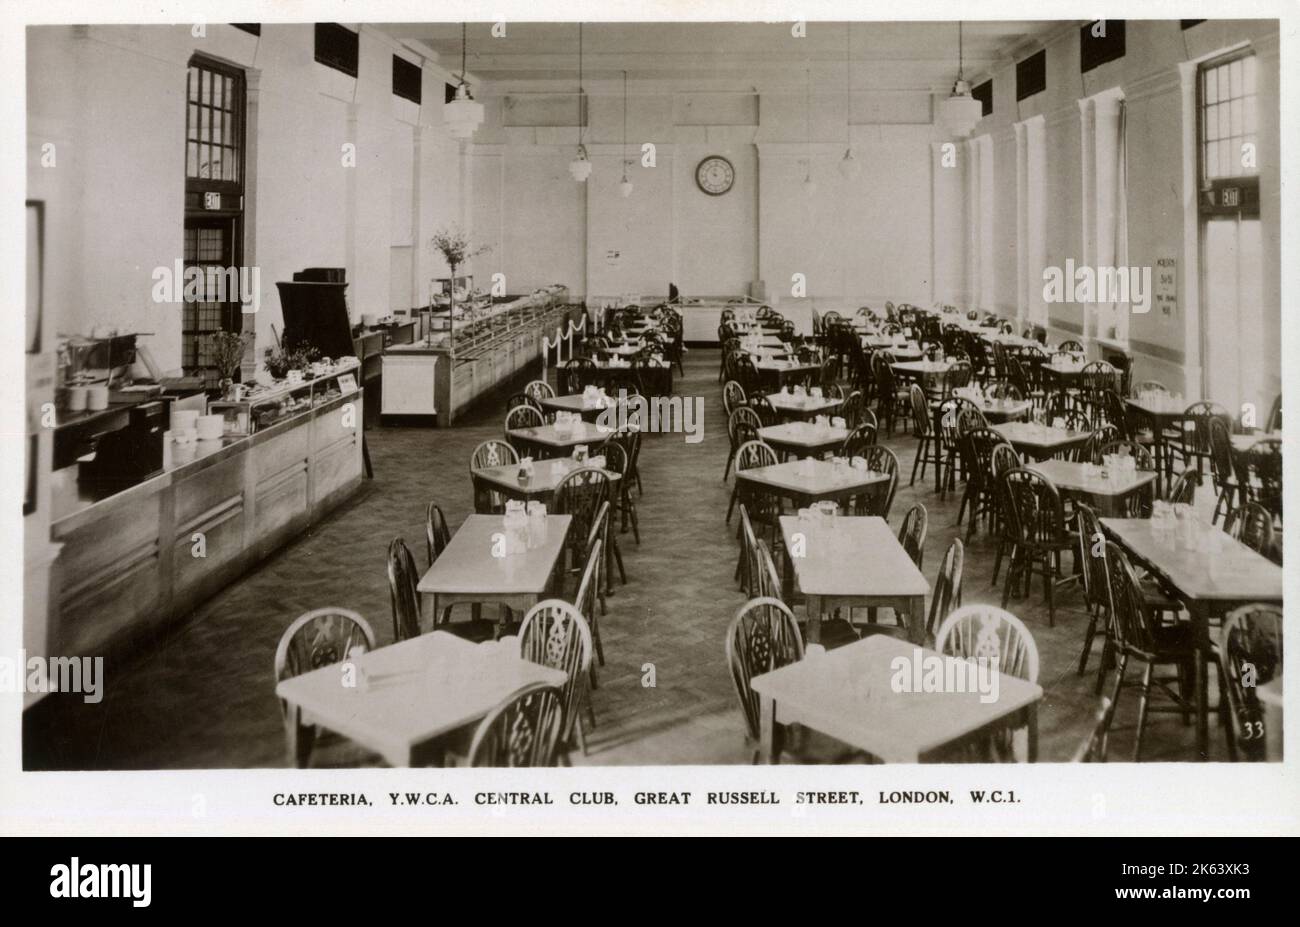 The YWCA - Central Club - Great Russell Street, London - The Cafeteria.     Date: circa 1910s Stock Photo